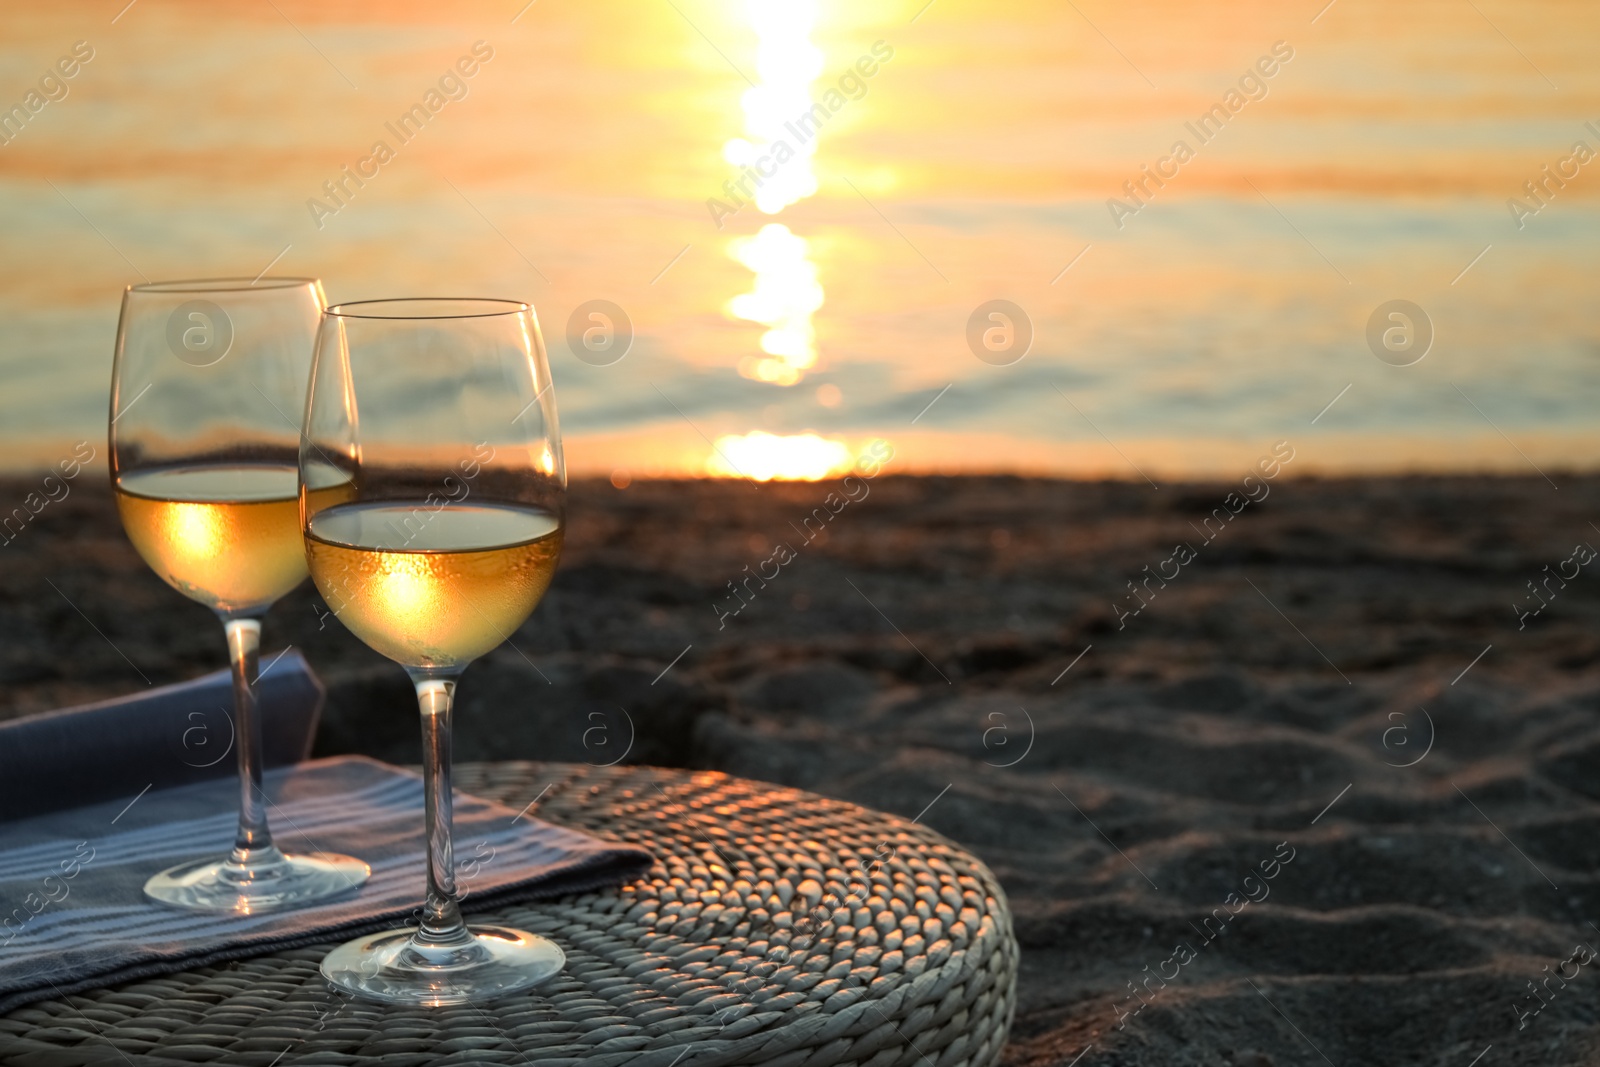 Photo of Glasses of delicious wine on riverside at sunset